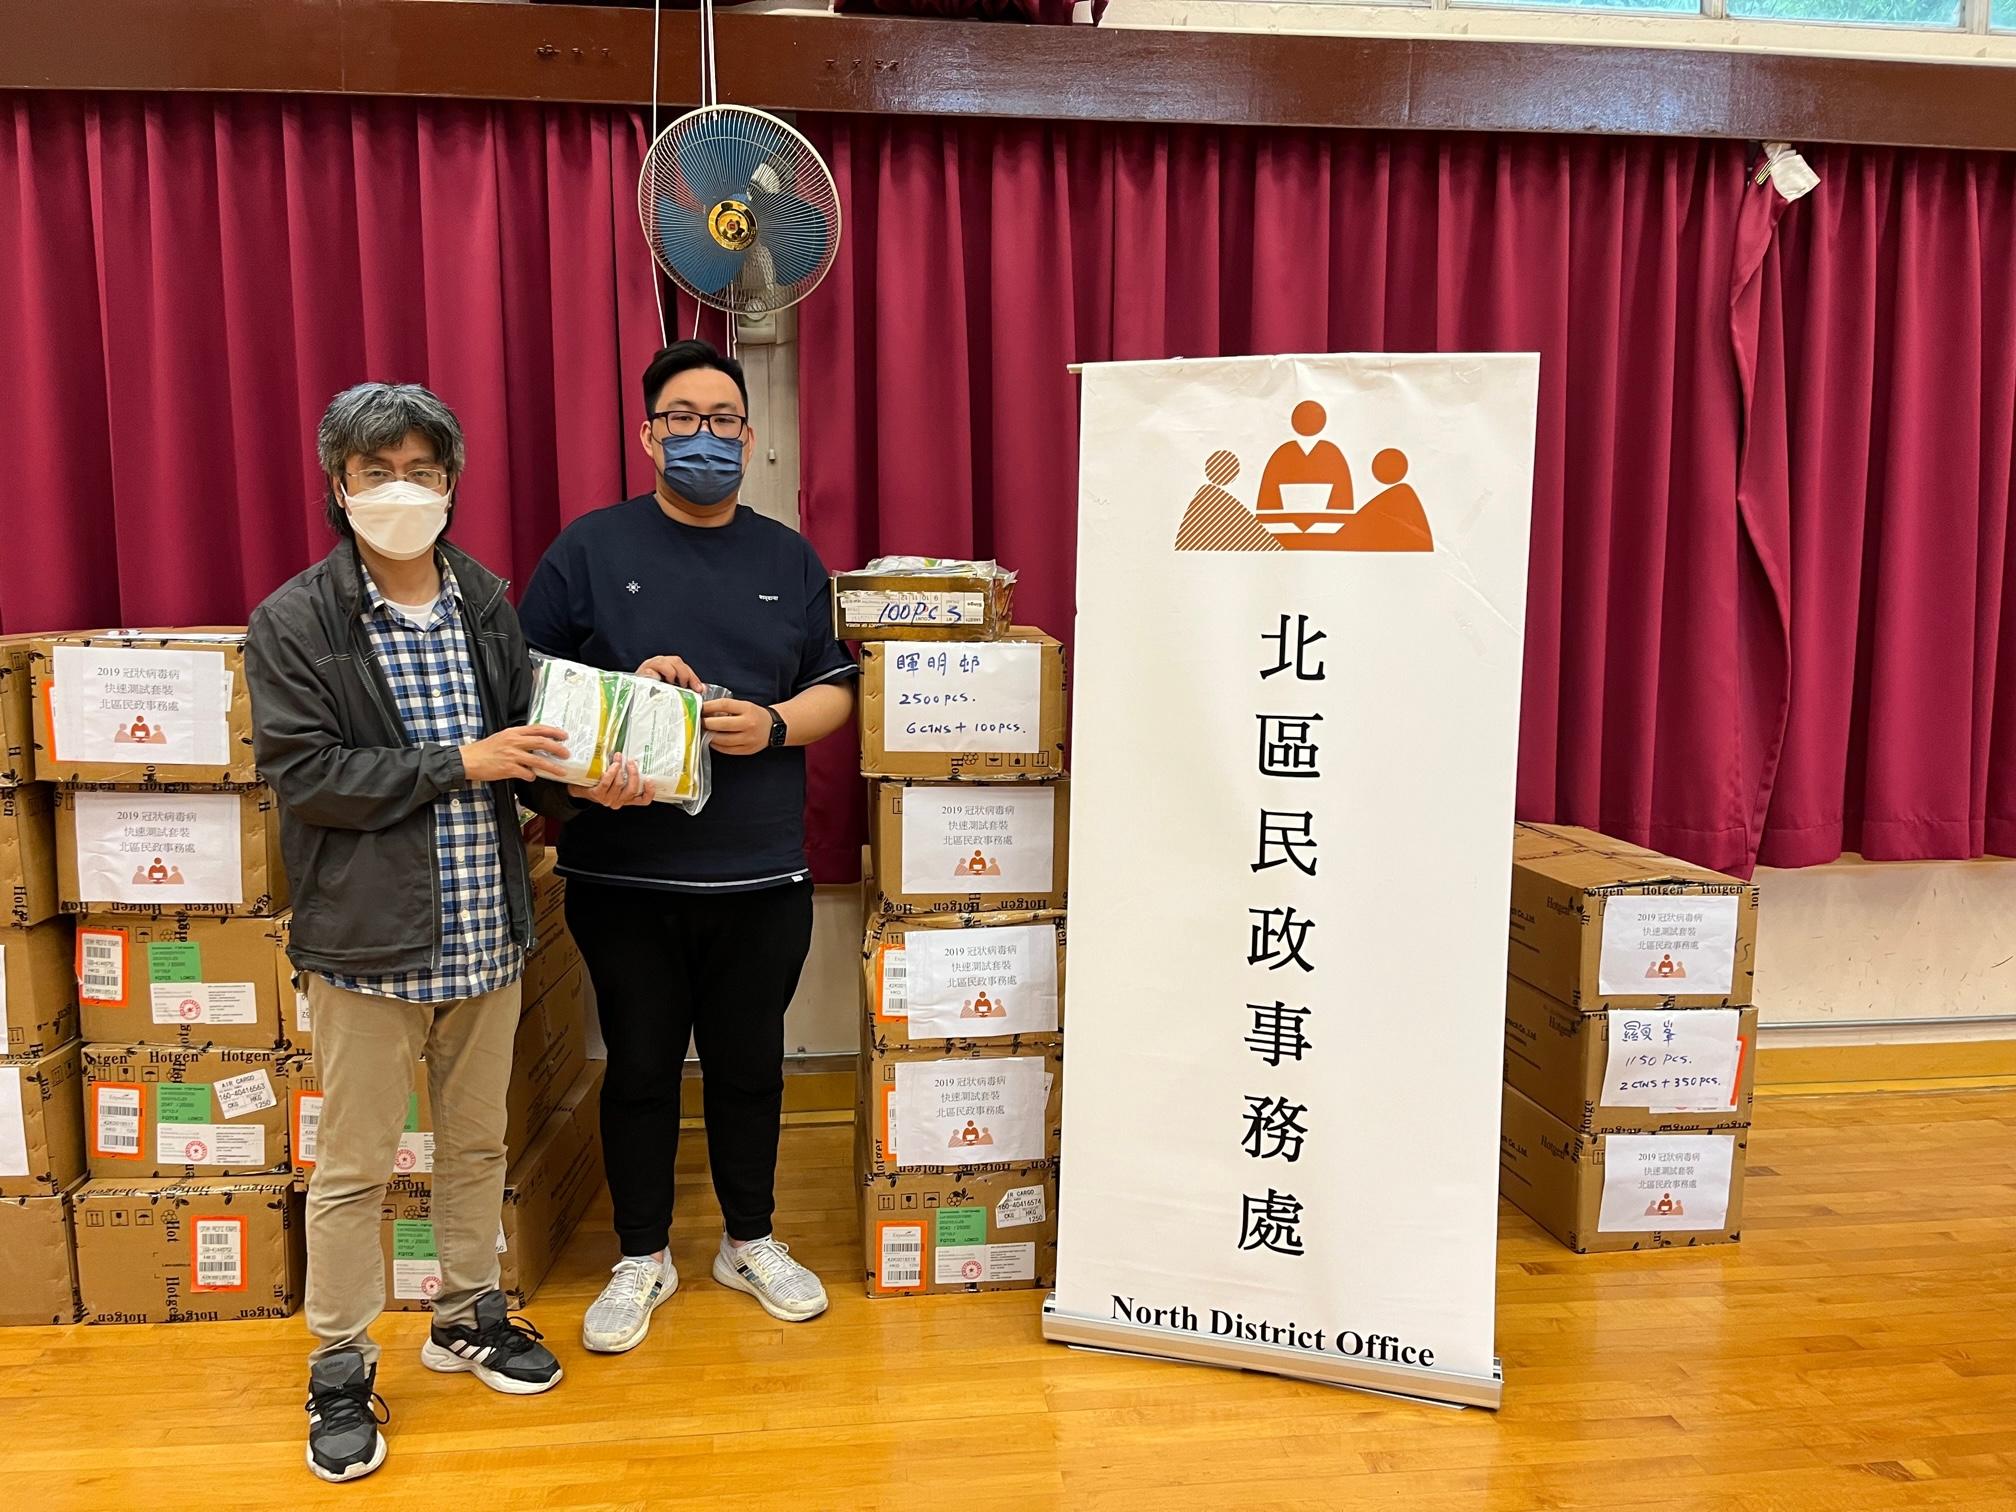 The North District Office today (March 28) distributed COVID-19 rapid test kits to households, cleansing workers and property management staff living and working in Fai Ming Estate for voluntary testing through the property management company.